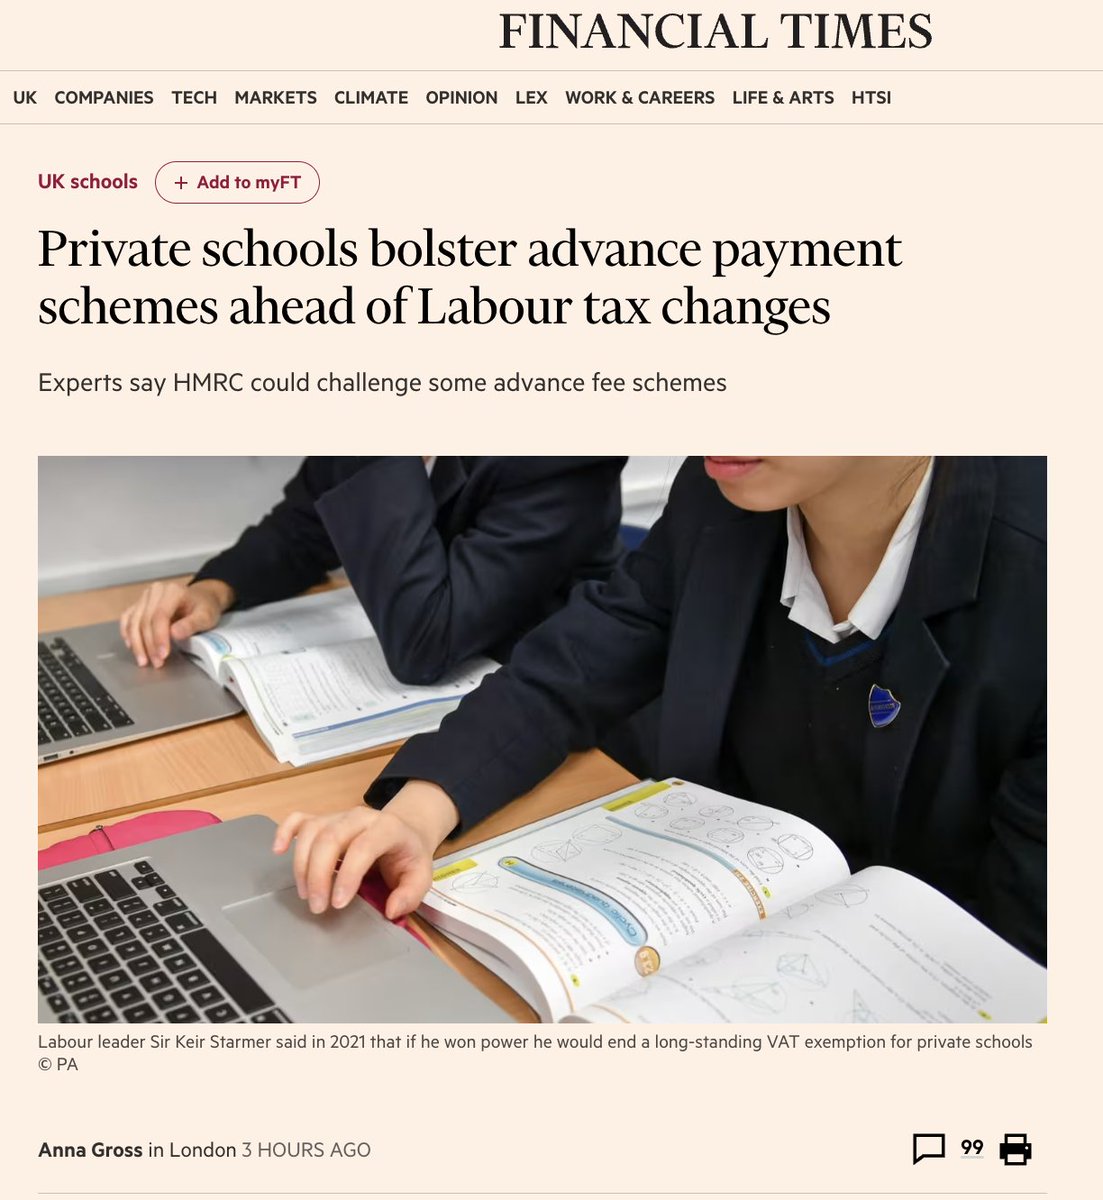 Private schools are promoting advance fee payment as a way to avoid VAT on school fees under a future Labour government. We're concerned that schools and parents are taking a risk they don't understand, and it could all become a big mess. Thread: